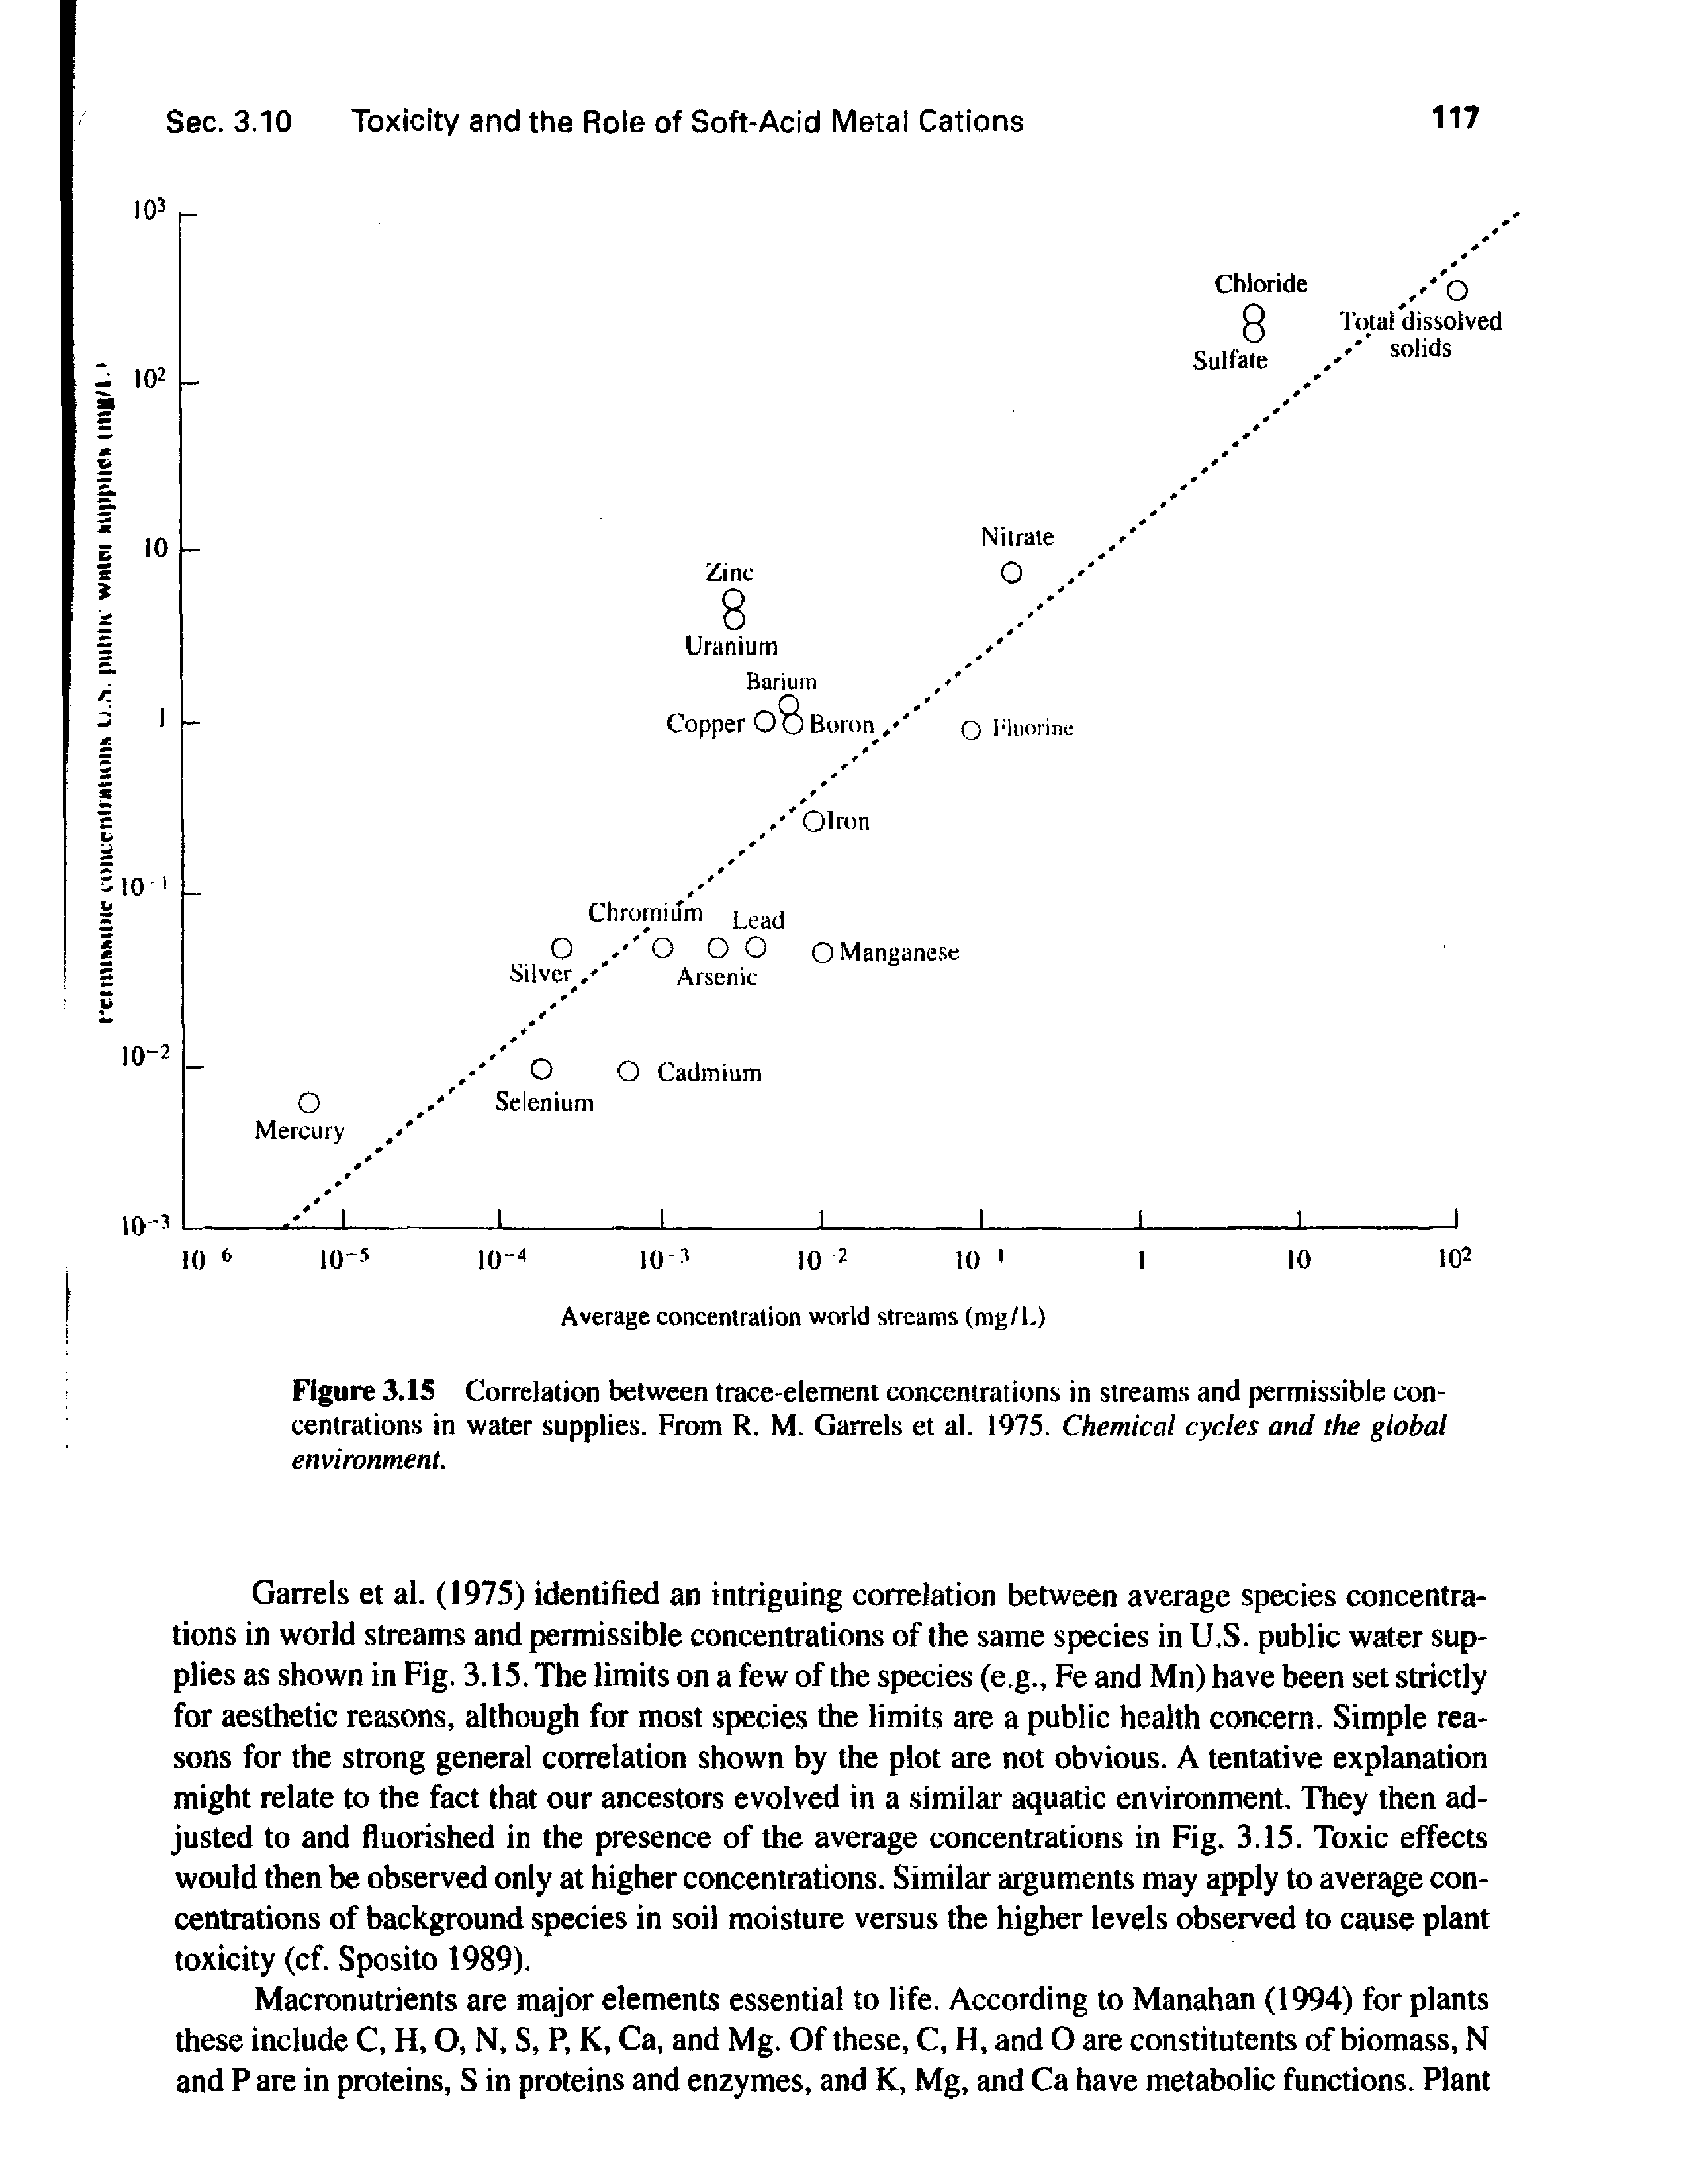 Figure 3.15 Correlation between trace-element concentrations in streams and permissible concentrations in water supplies. From R. M. Carrels et al. 1975. Chemical cycles and the global environment.